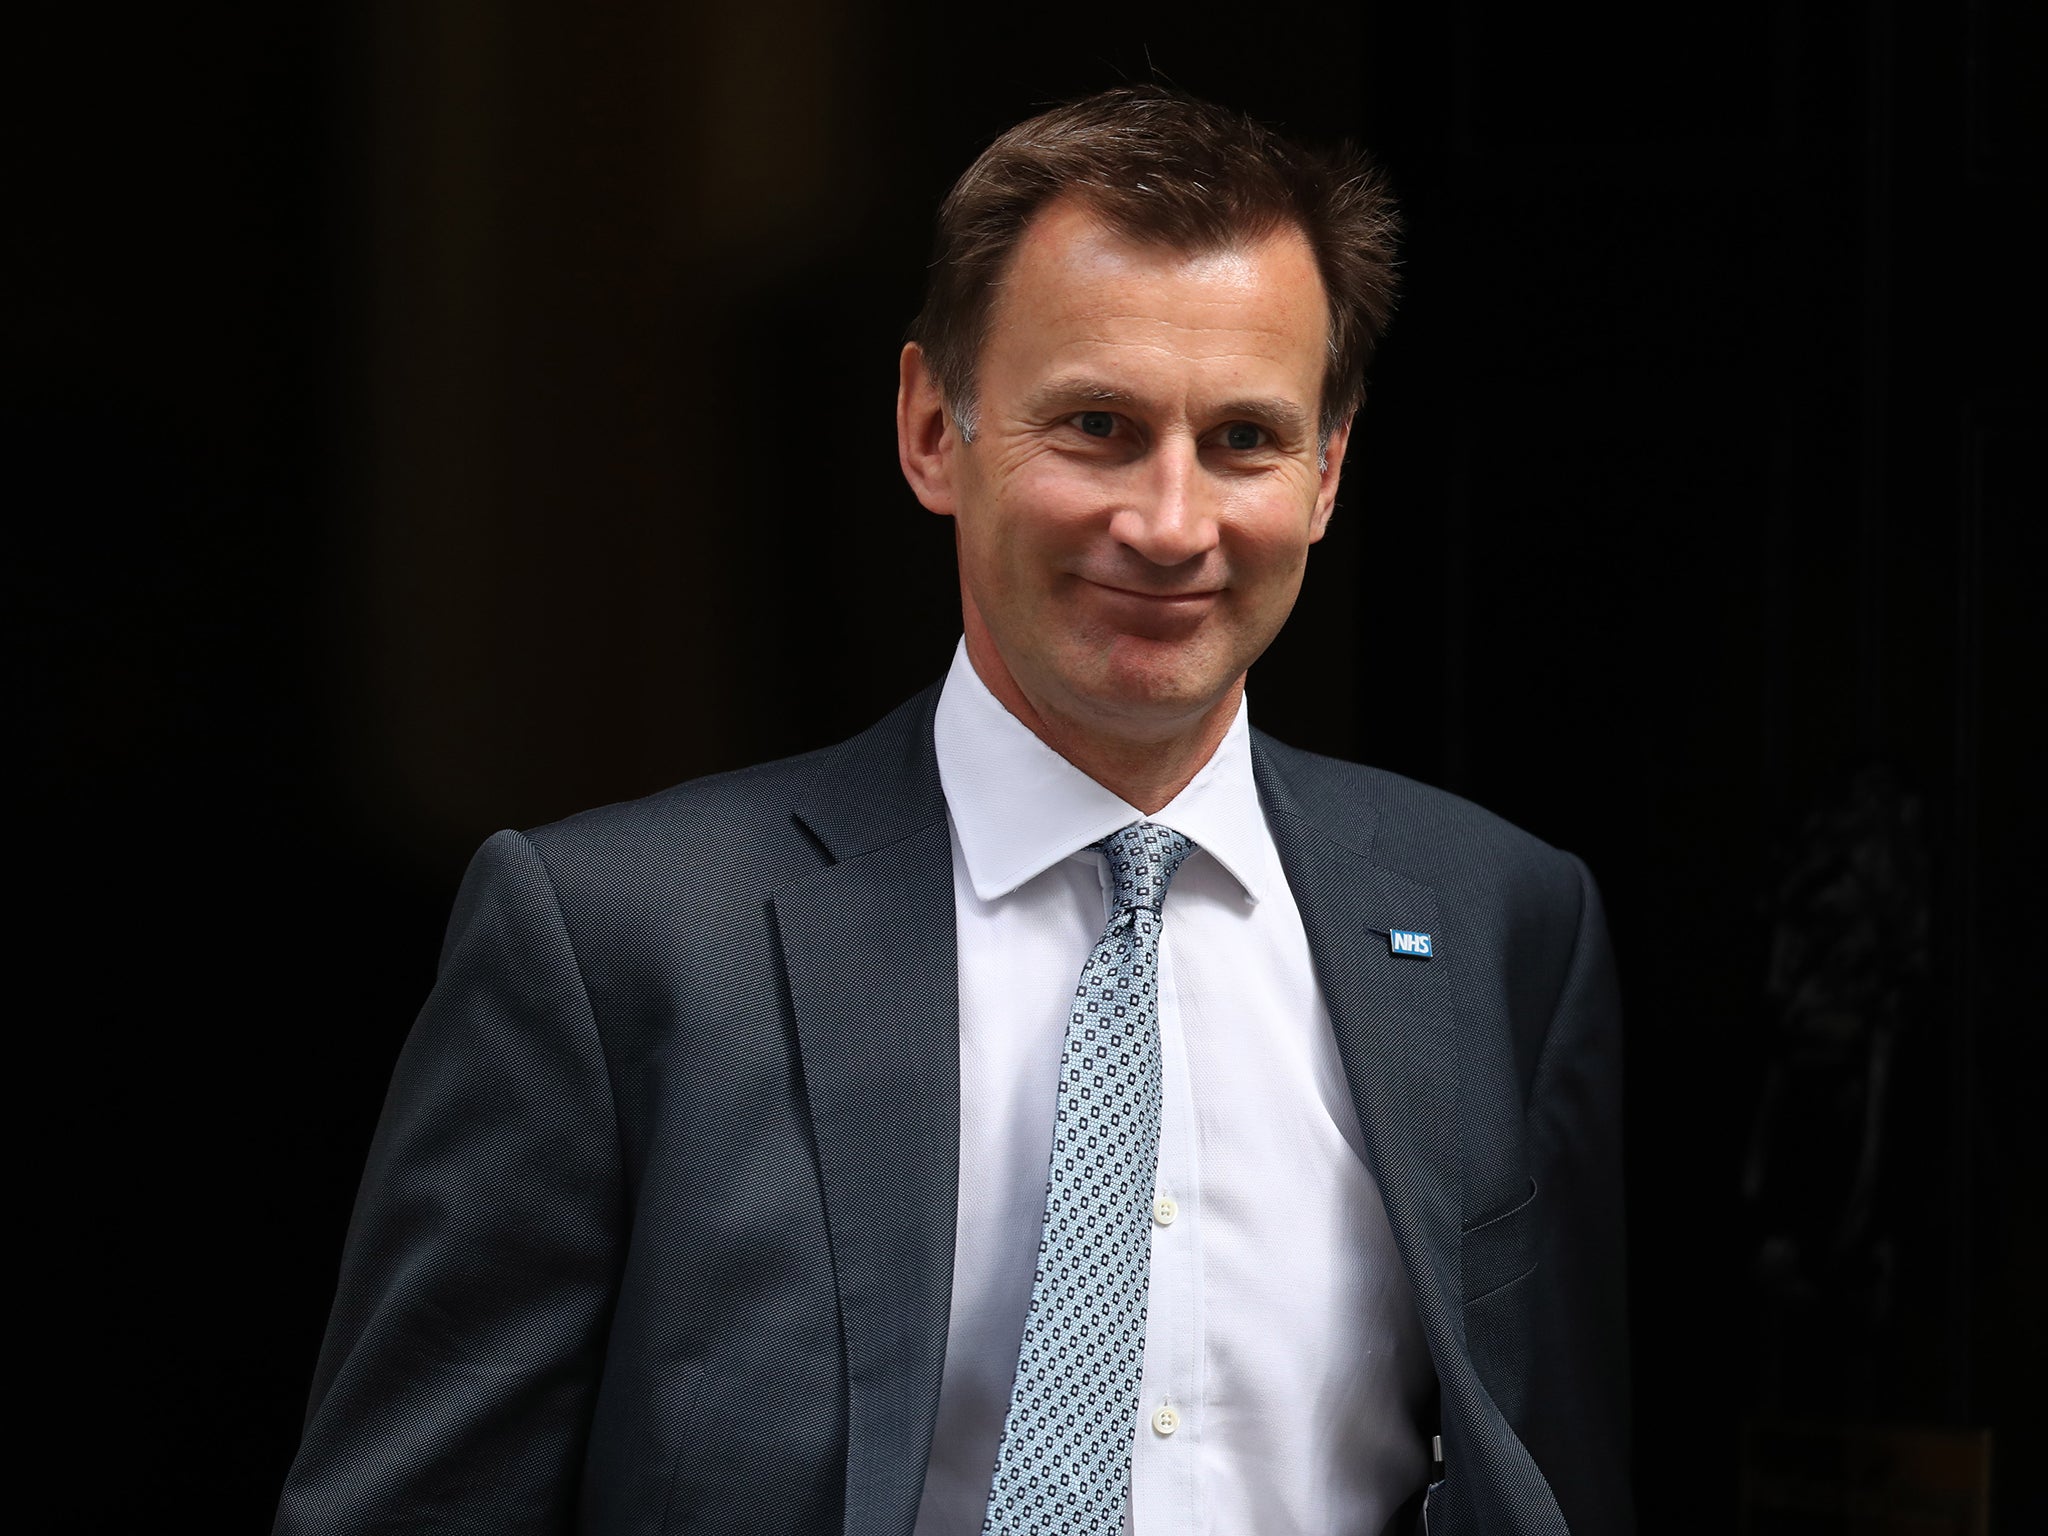 Campaigners argue that once trusts saw that the body providing so much of their income was behind Mr Hunt, they had little choice but to agree to implement his contracts